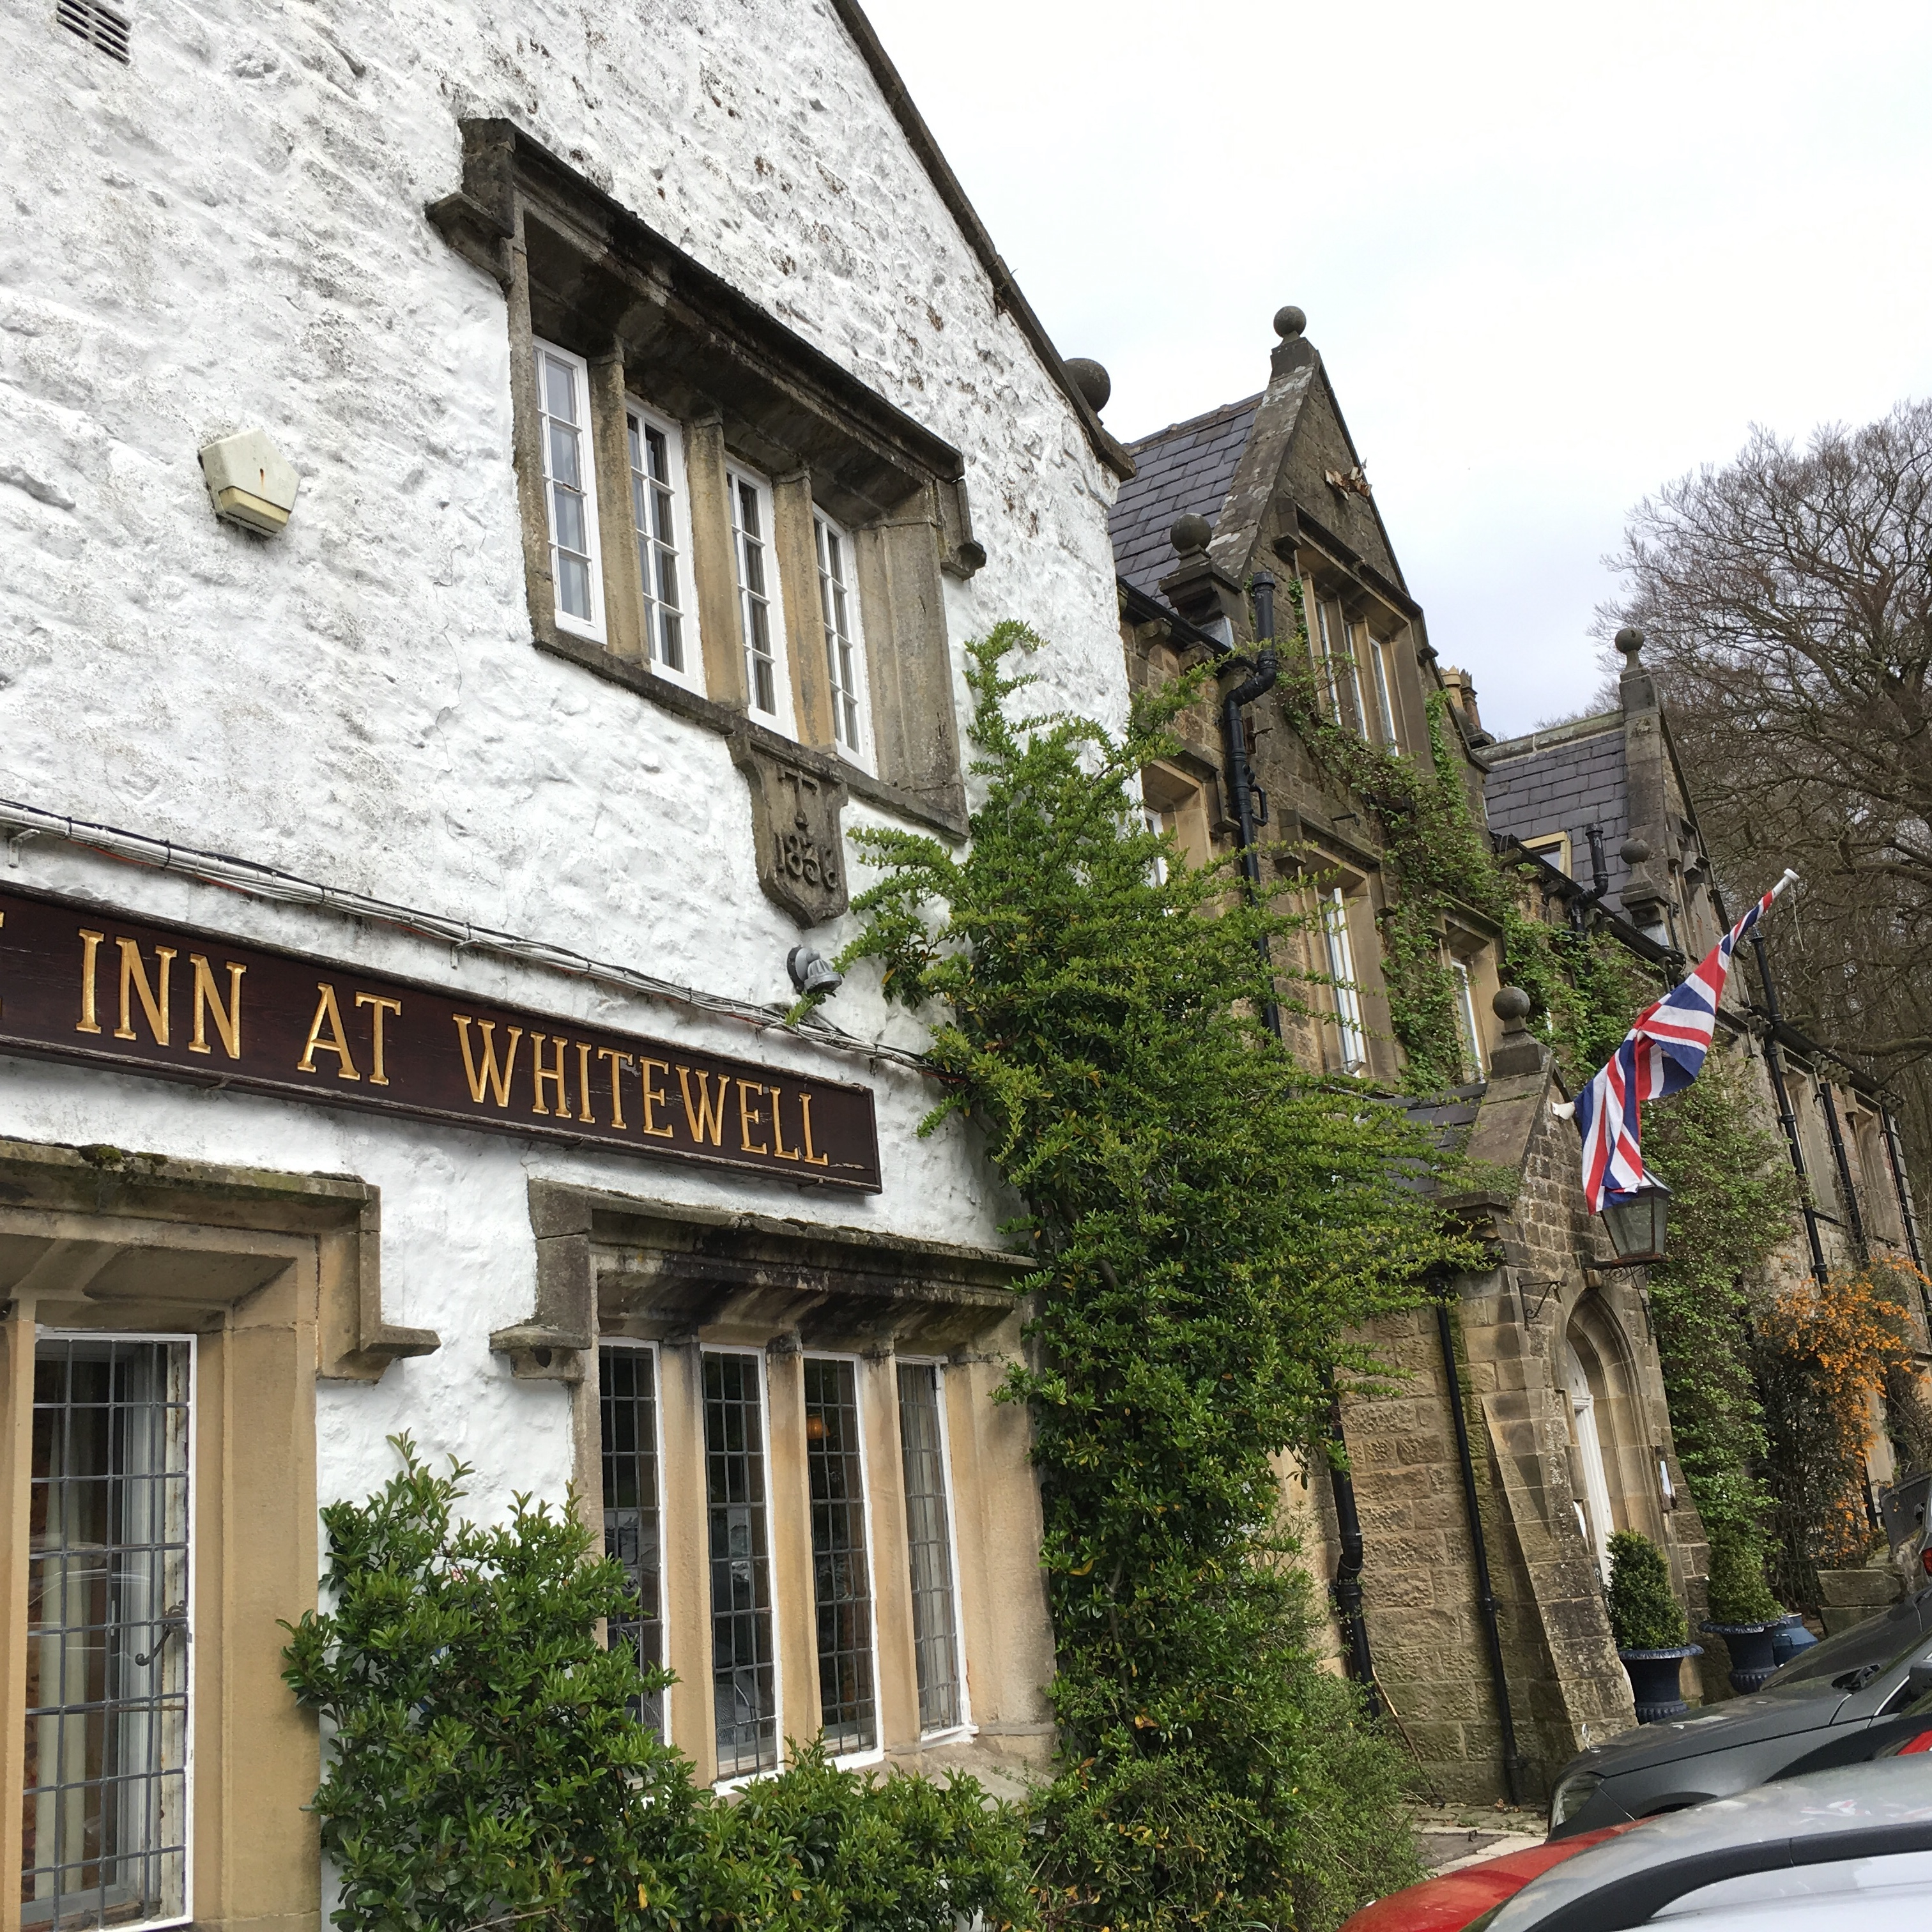 The Inn at Whitewell by wedding pianist Craig Smith